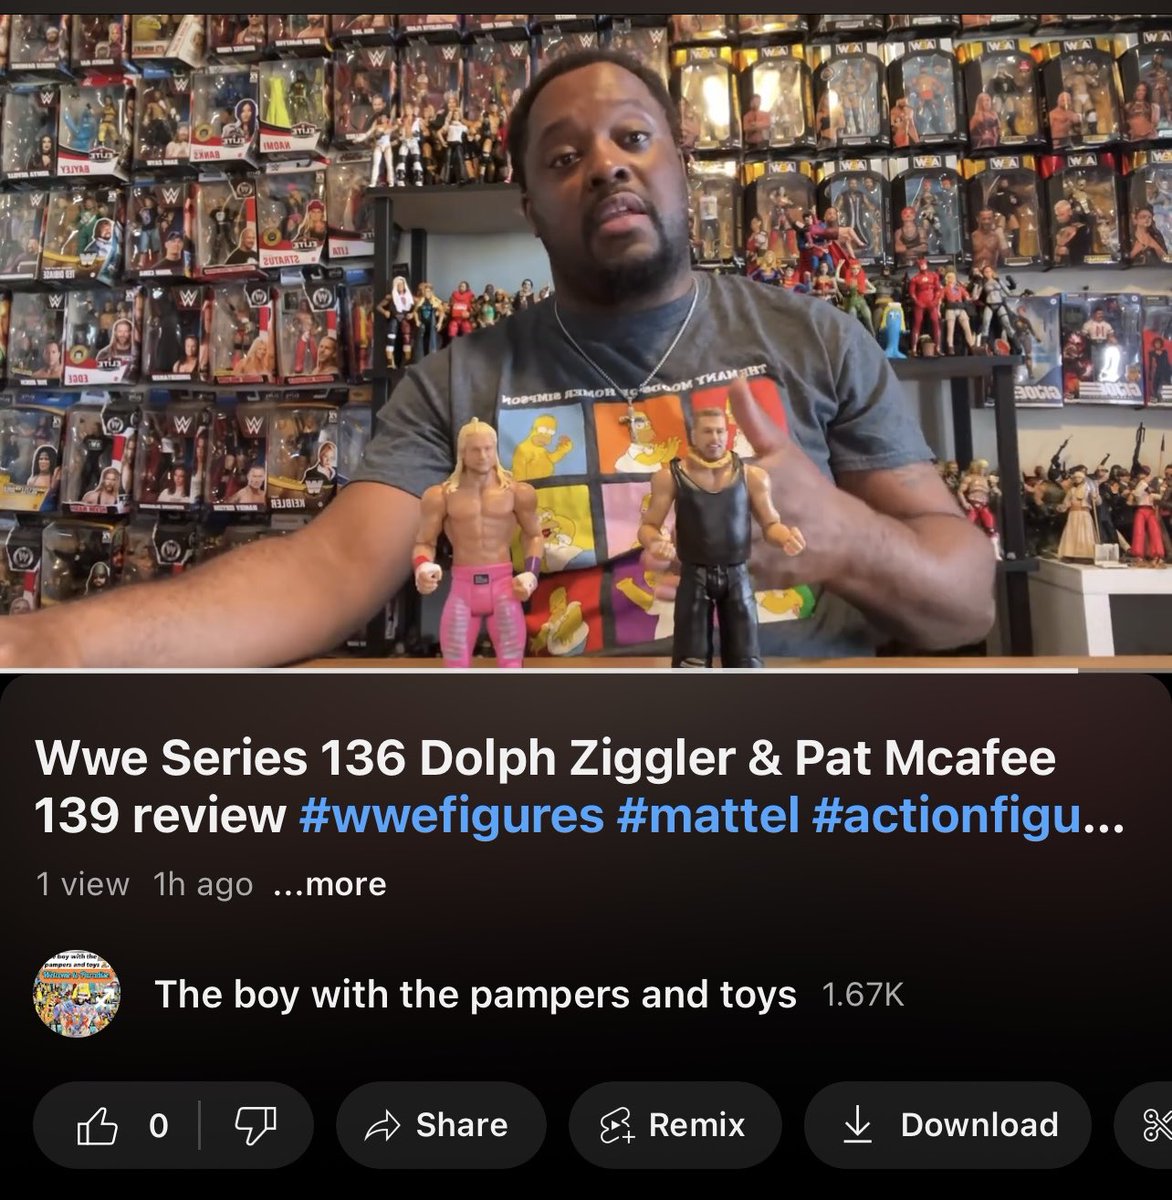 Please like, share & subscribe today 🌎. #youtuber #toychannel #theboywiththepampersandtoys #wwe #mattel #figurereview #actionfigureunboxing #toycollectors #ringsidecollectibles #patmcafee #dolphziggler